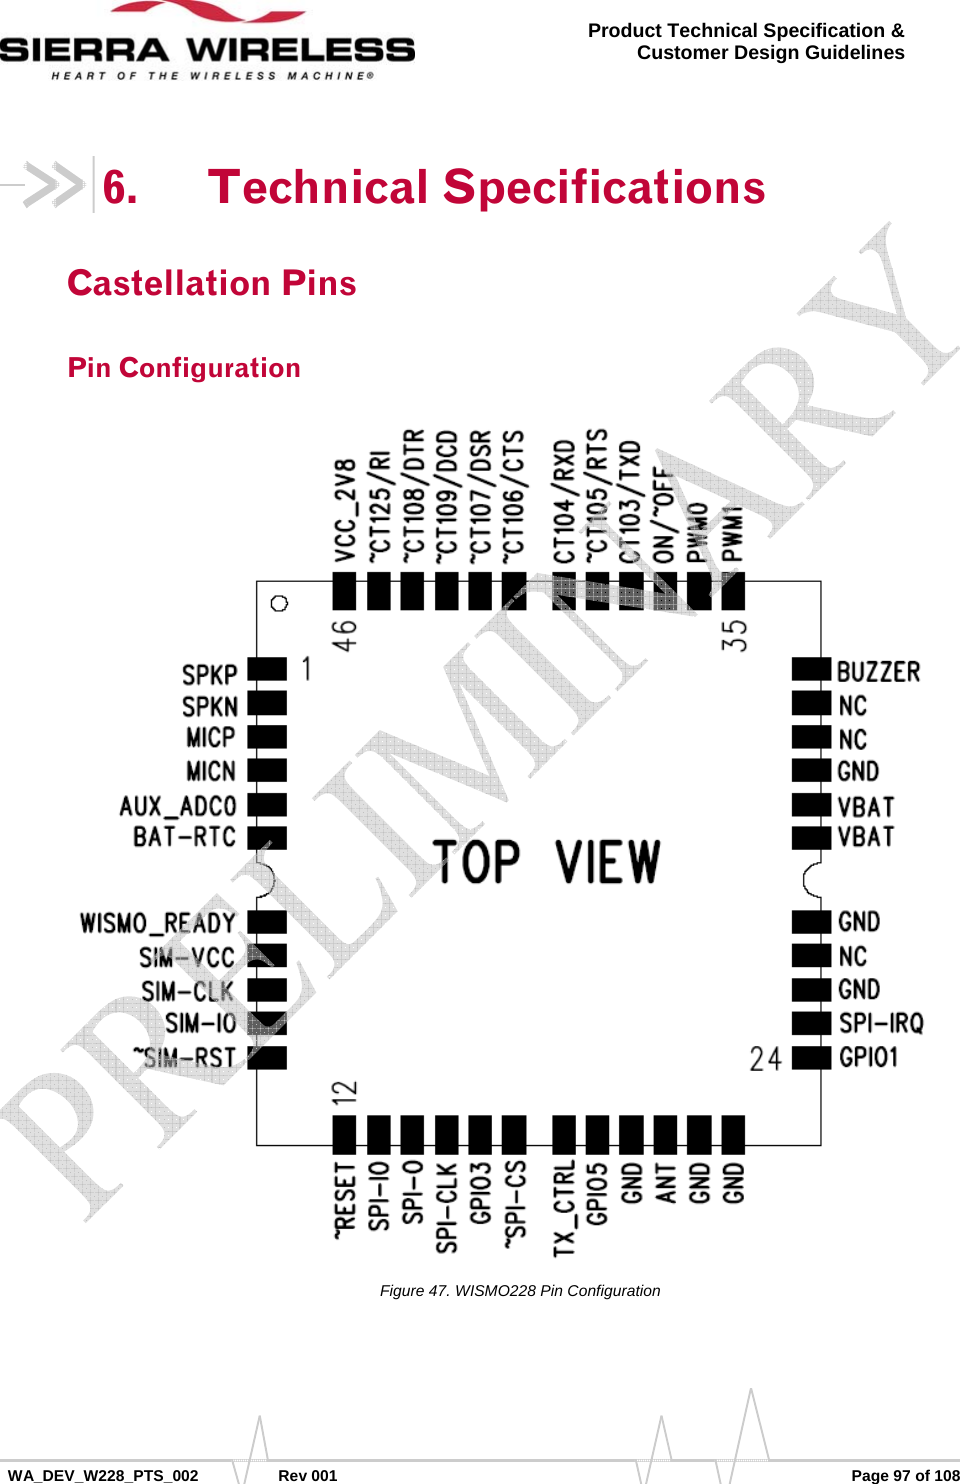      WA_DEV_W228_PTS_002 Rev 001  Page 97 of 108 Product Technical Specification &amp; Customer Design Guidelines 6. Technical Specifications Castellation Pins Pin Configuration Figure 47. WISMO228 Pin Configuration    